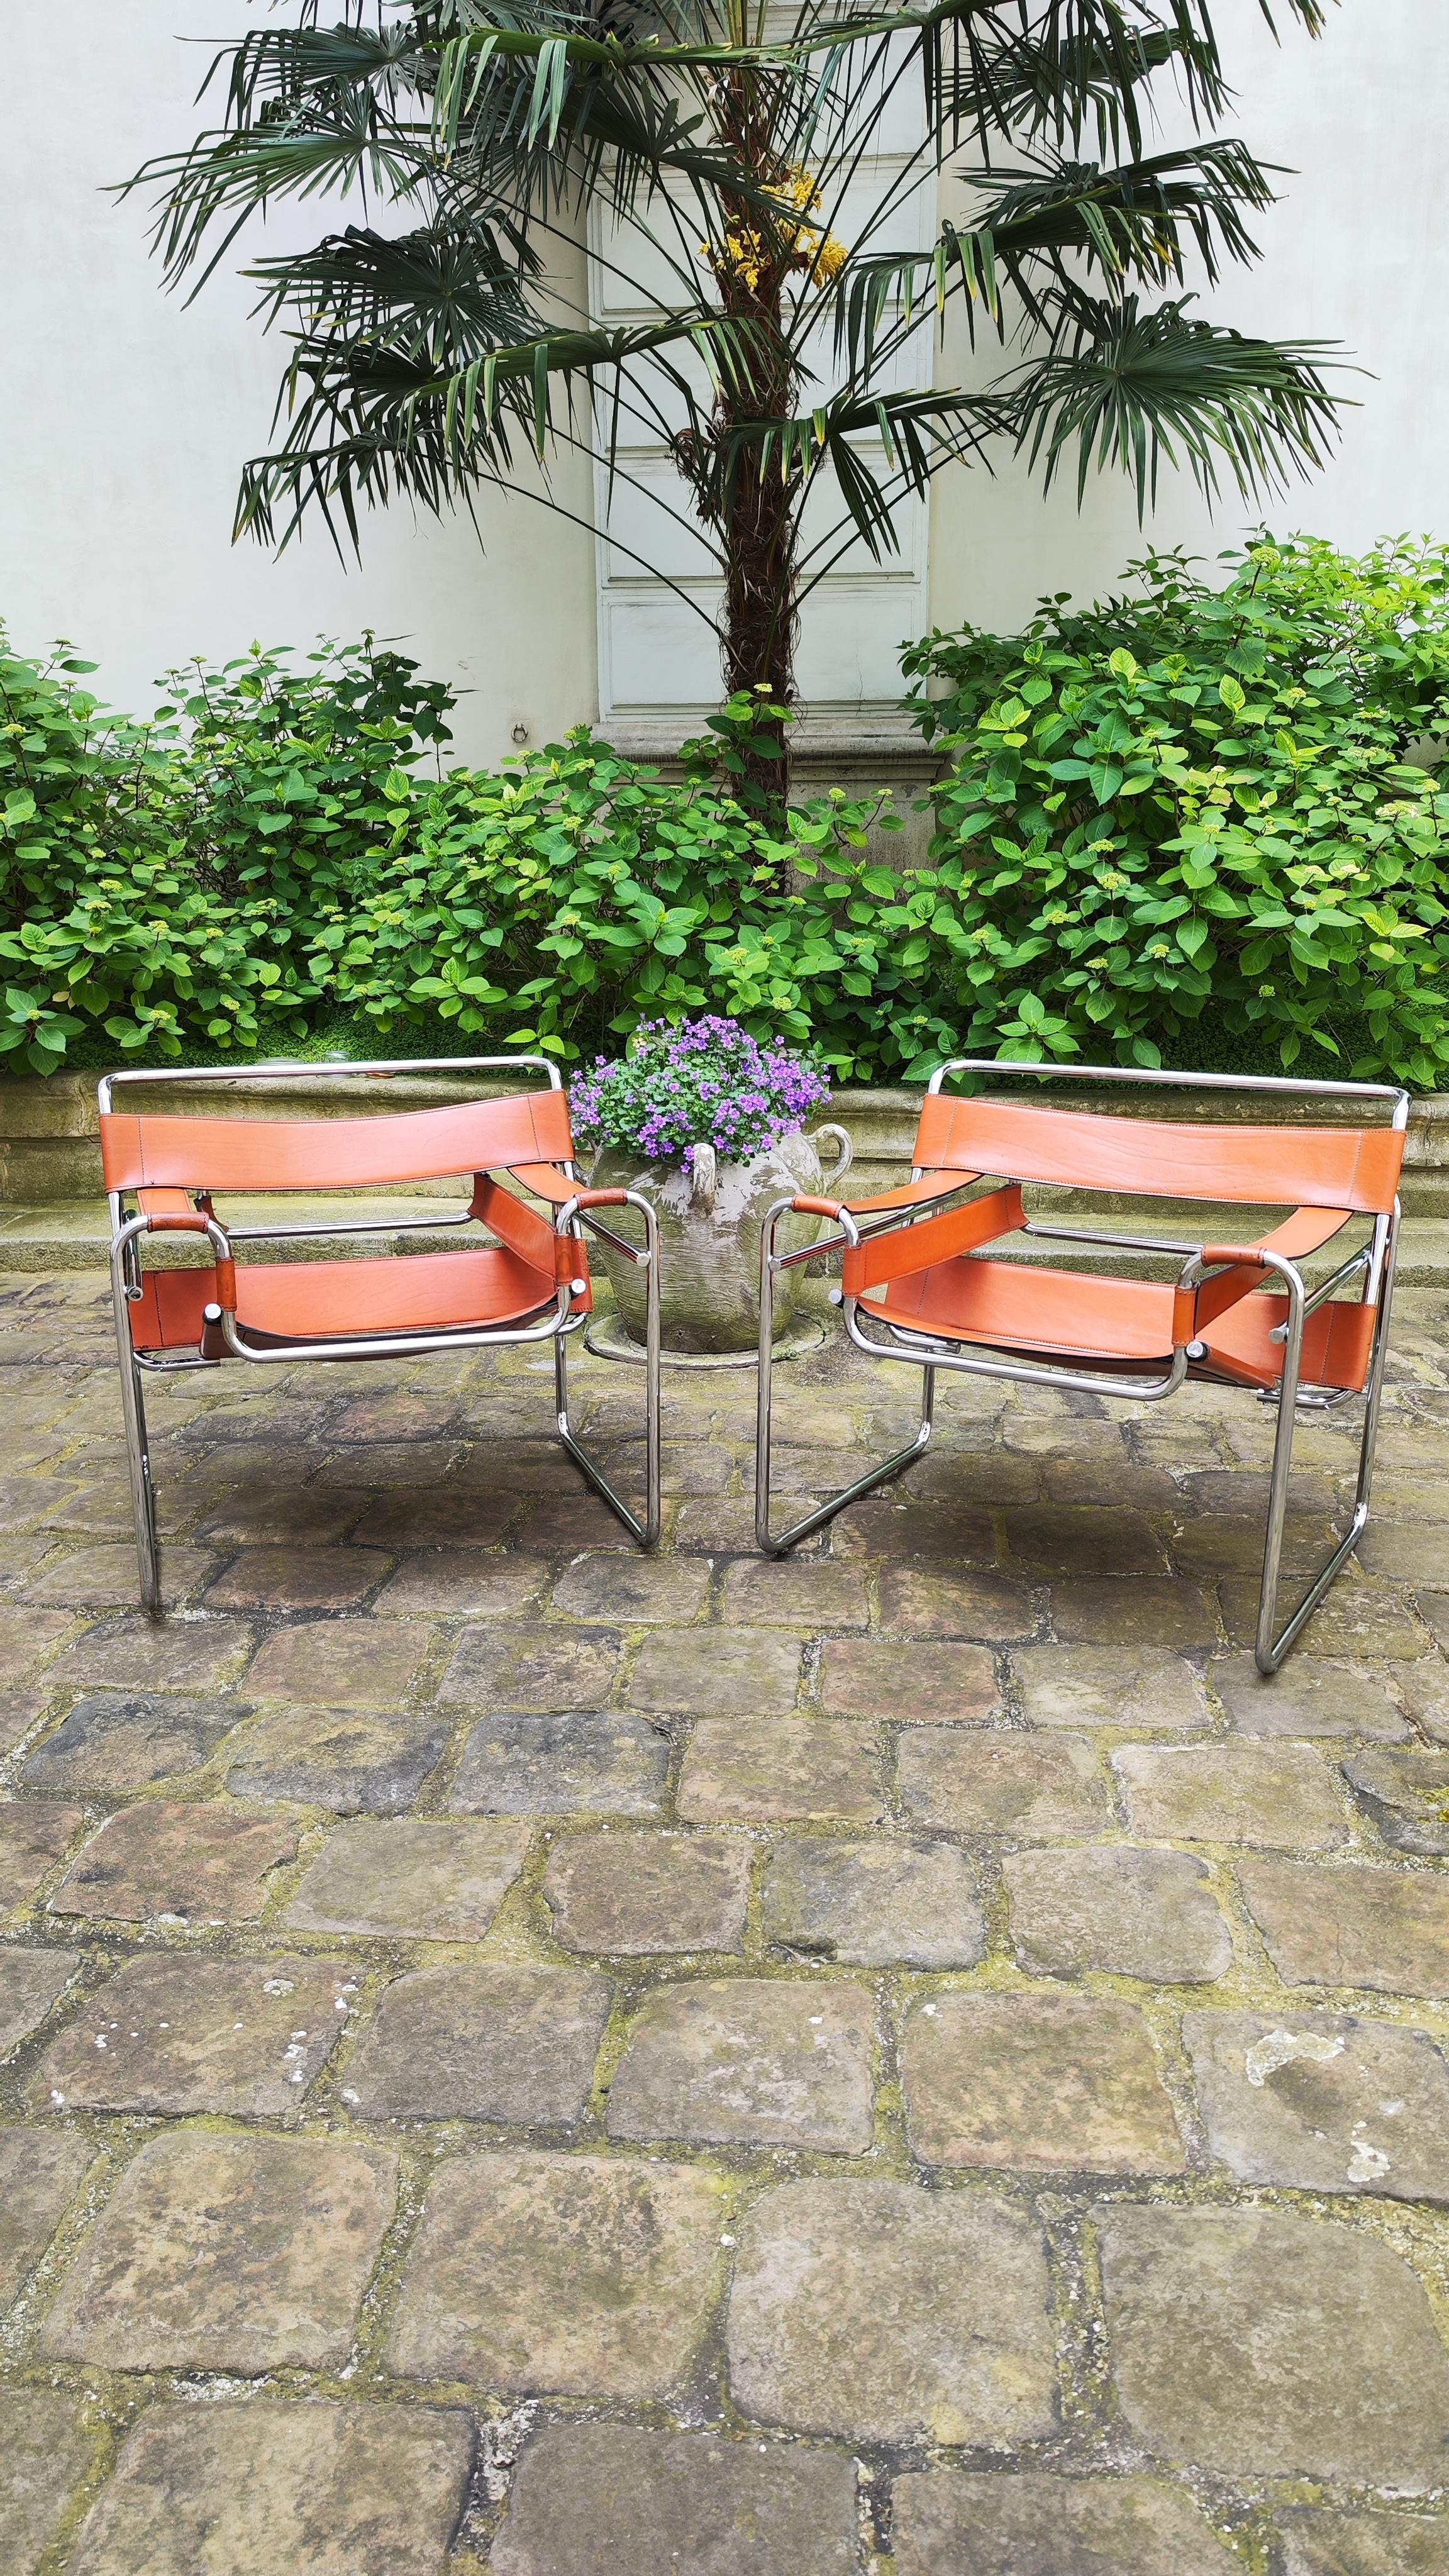 Rare : superb pair of leather armchairs, Marcel Breuer Wassily, fasem edition 1983.
.
Sublime patina.
.
Two damages that you can see on the leather (see photos), and slight wears on the steel which in no way detracts from the beauty of these